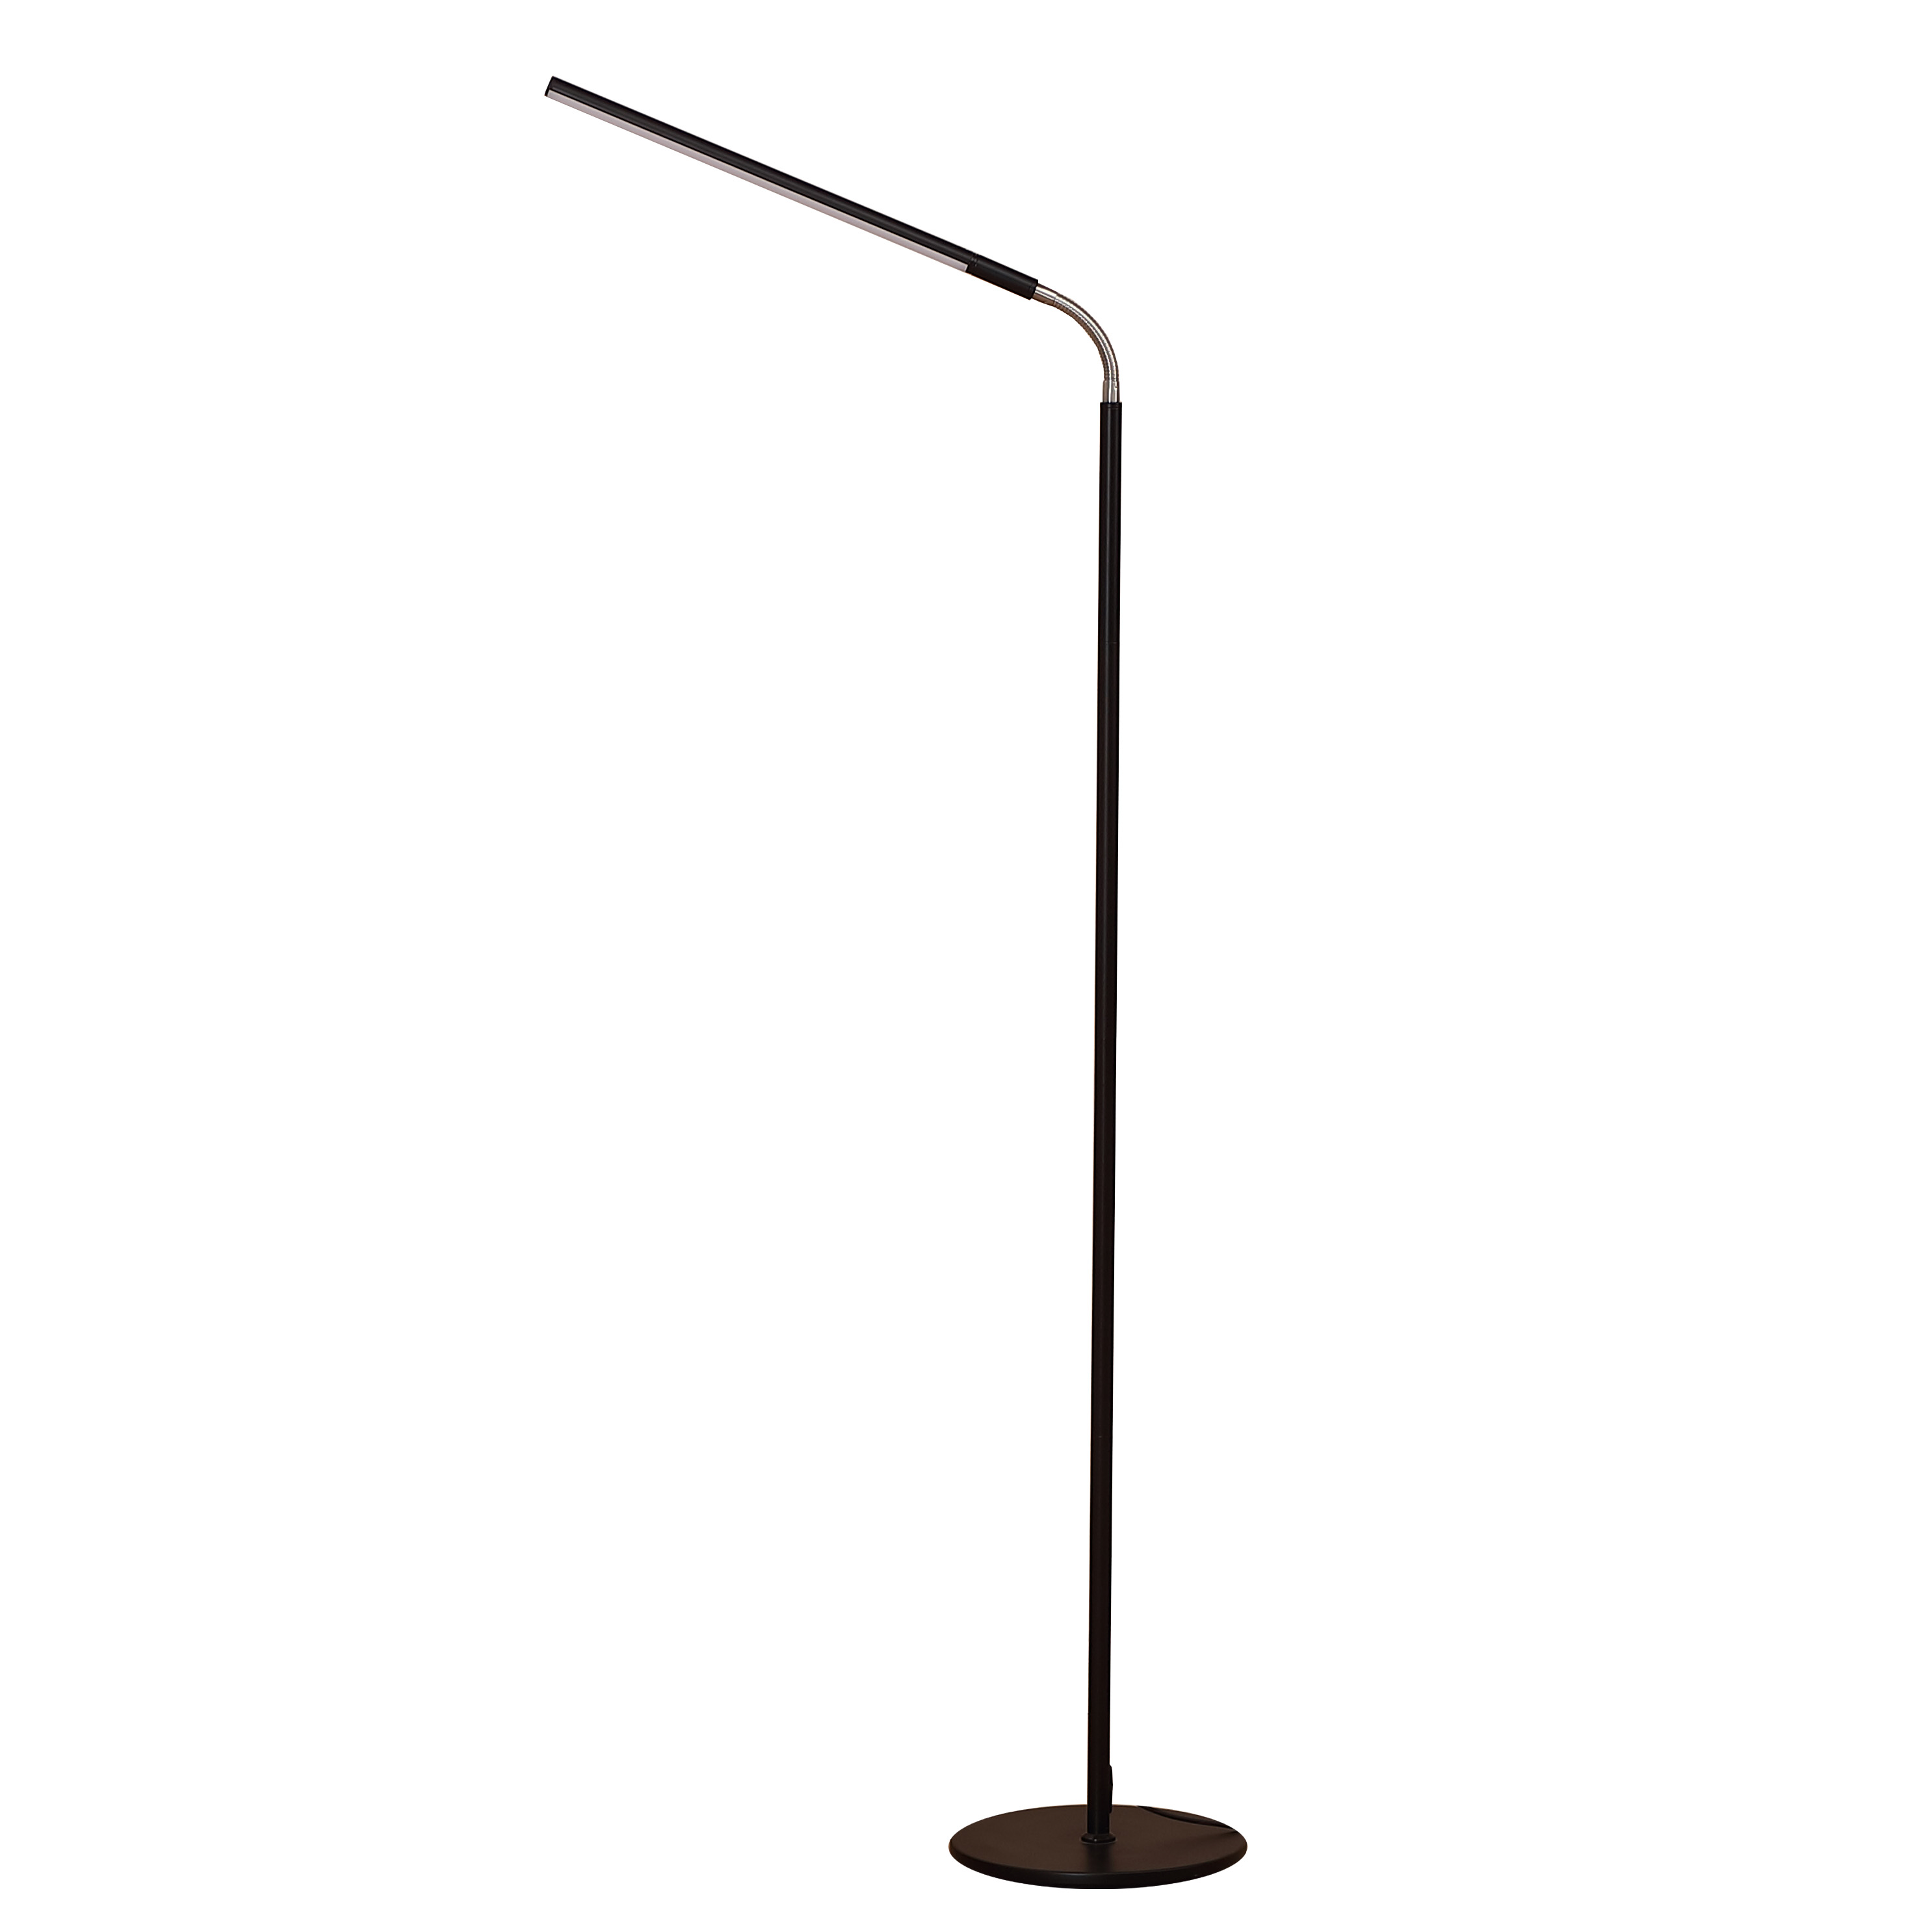 Modern LED Floor Lamp, 3 Way Dimmable  | Goodly-GL-FLM046 Featured Image